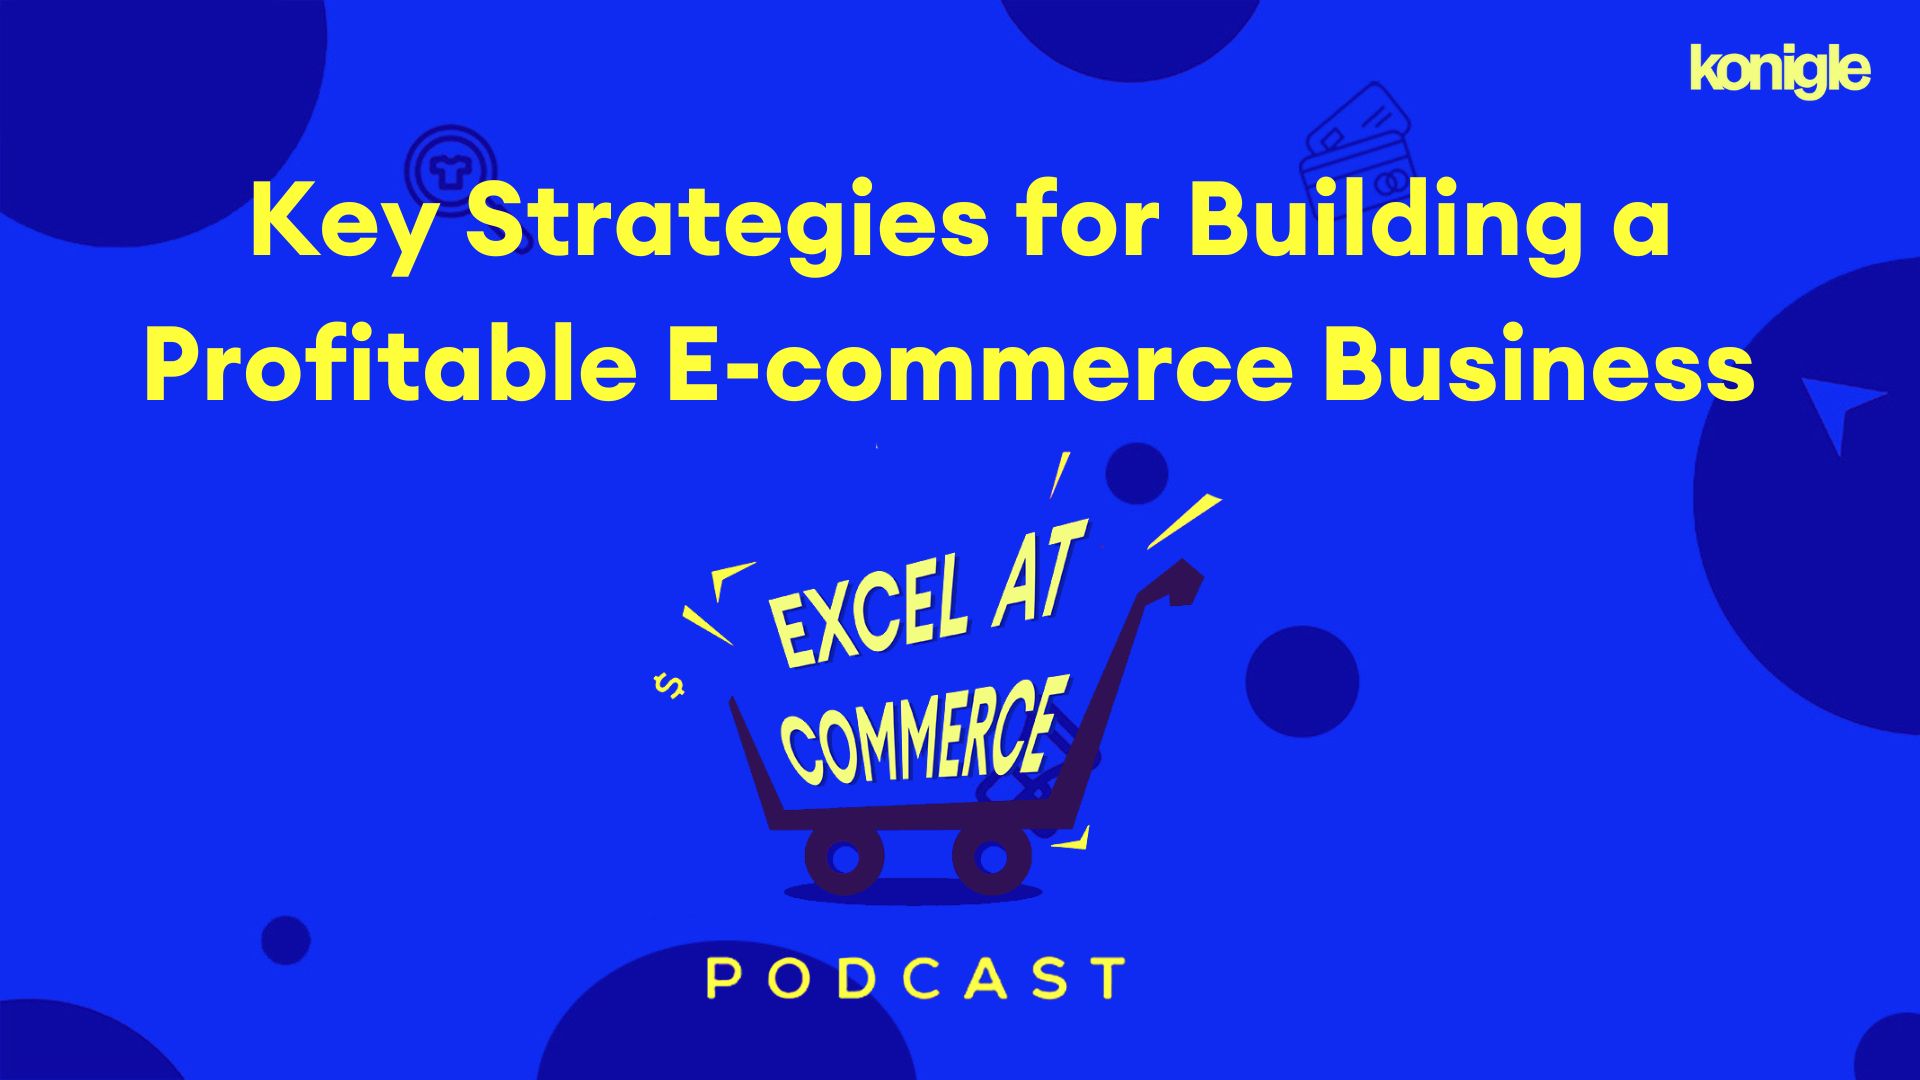 Key Strategies for Building a Profitable E-commerce Business